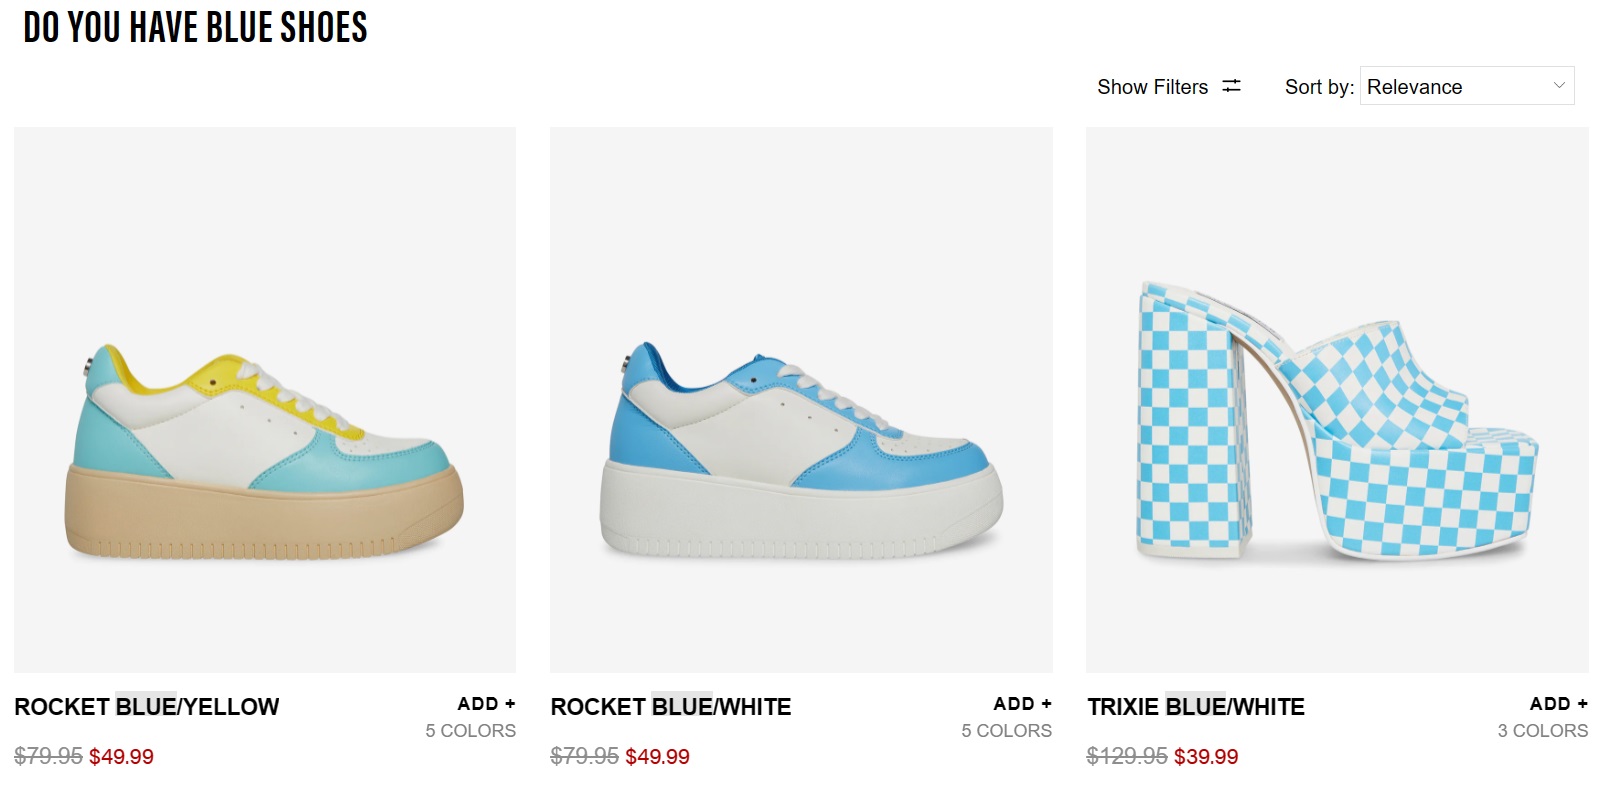 Screen shot of Steven Madden's website after searching for "Do you have blue shoes?"a website page with four different shoes on it